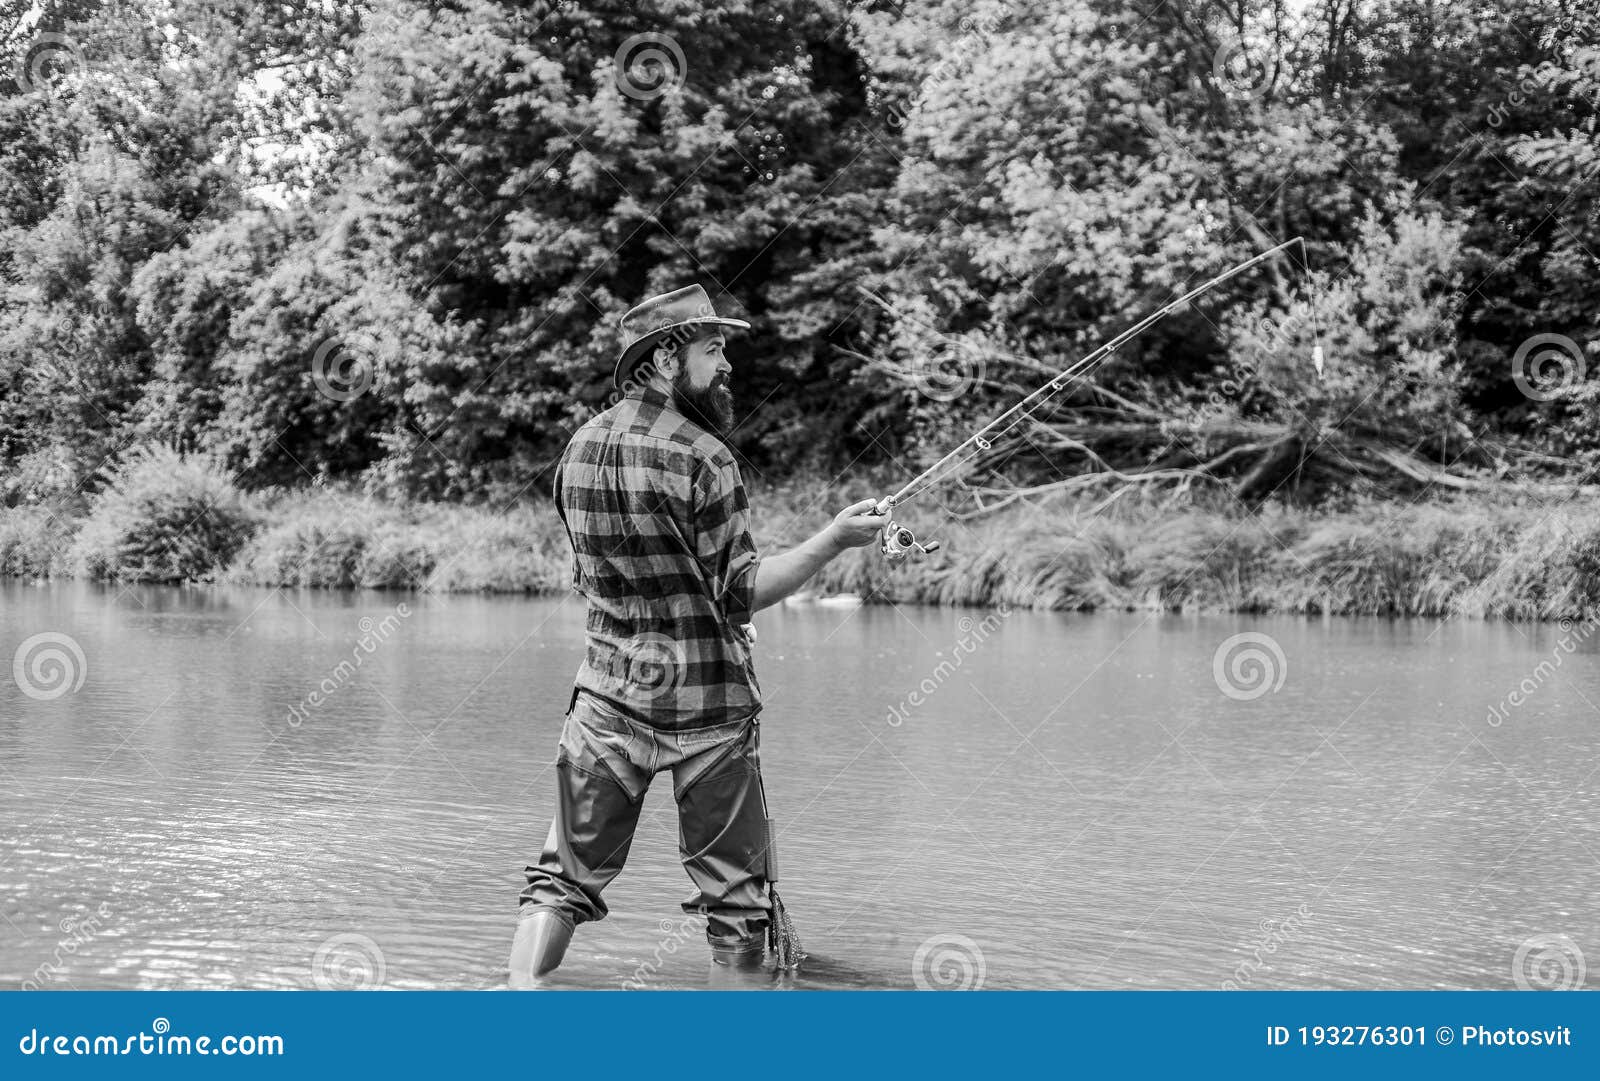 https://thumbs.dreamstime.com/z/fishing-reel-deal-summer-weekend-big-game-mature-man-fly-catching-fish-bearded-fisher-water-fisherman-rod-hobby-193276301.jpg